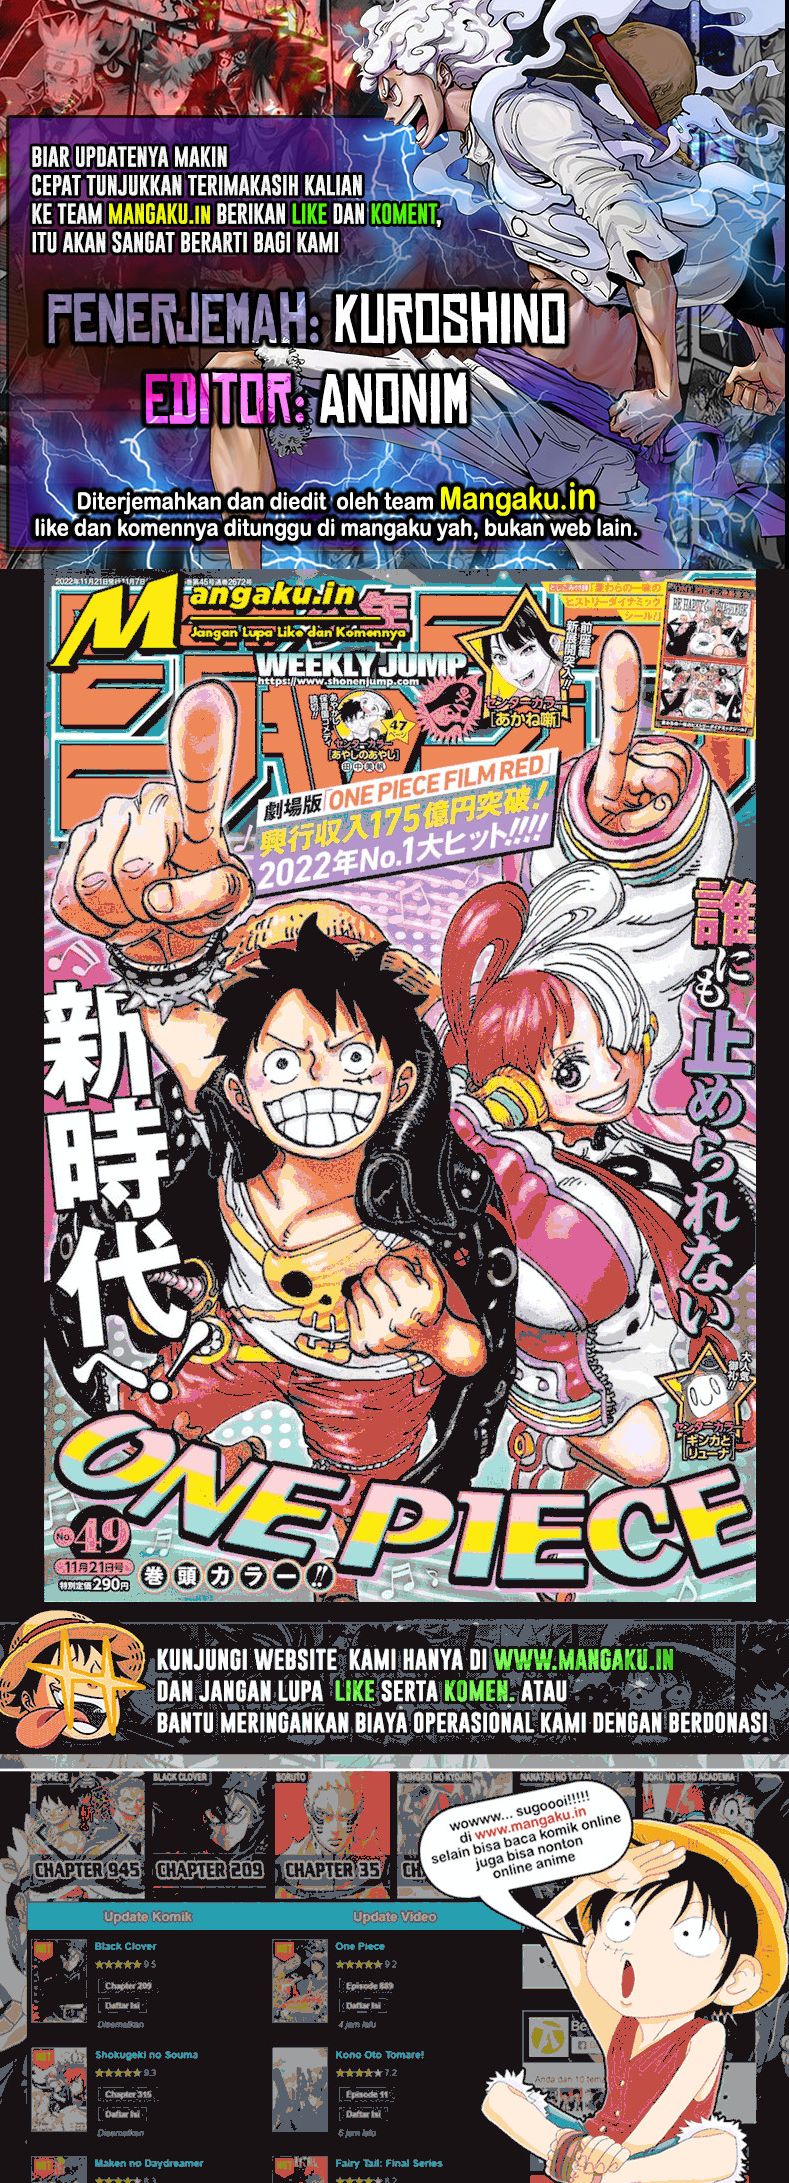 One Piece Chapter 1065 Hq - 37